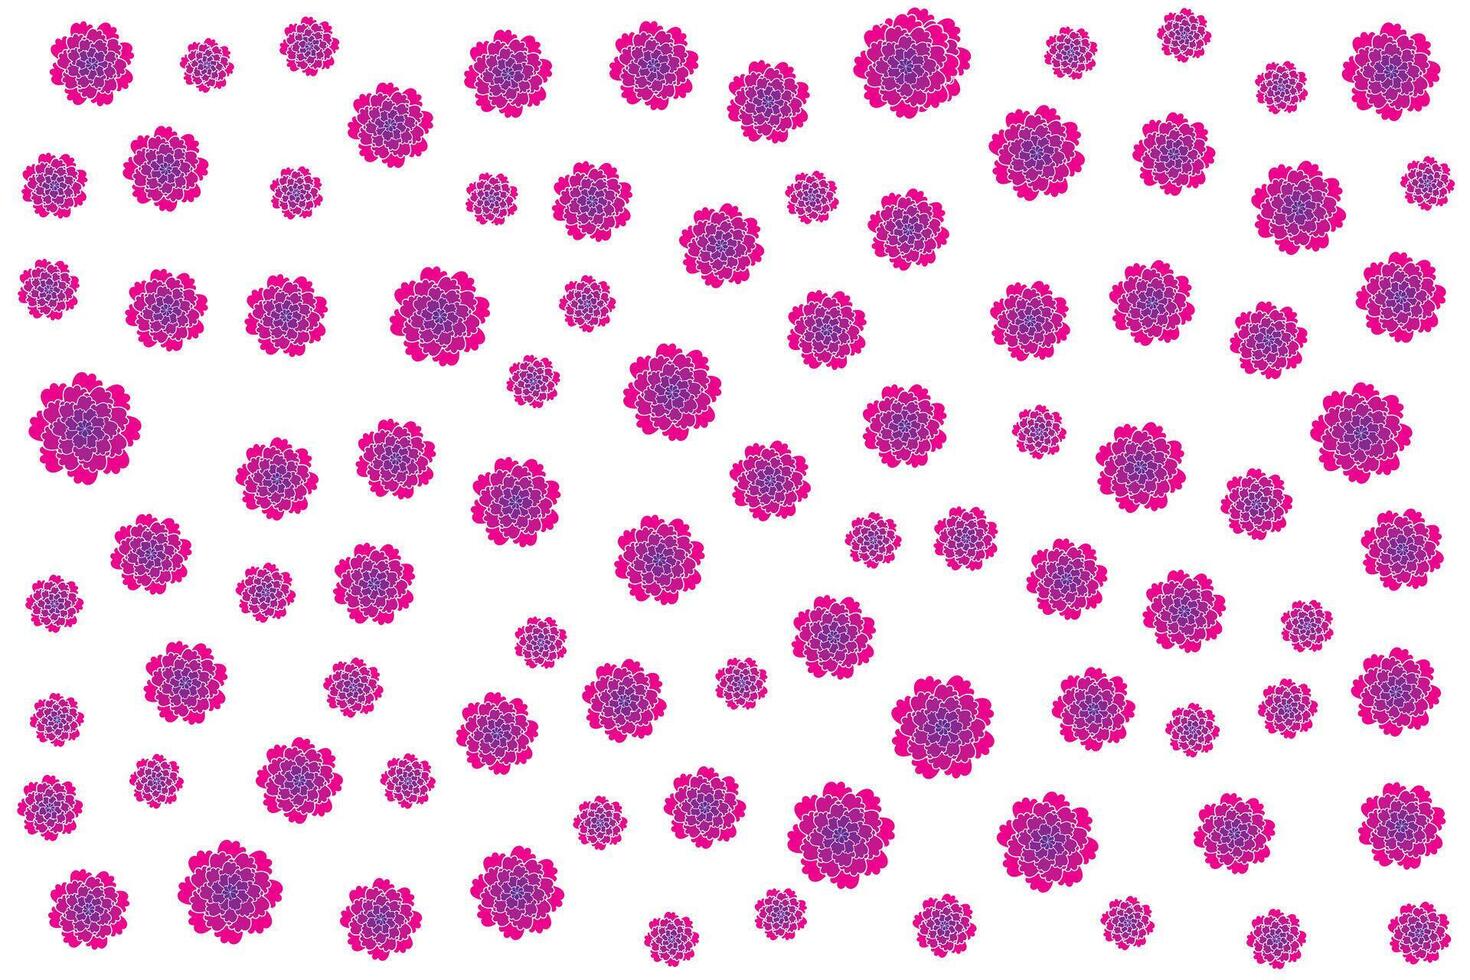 Illustration wallpaper of Abstract flower on white background. vector